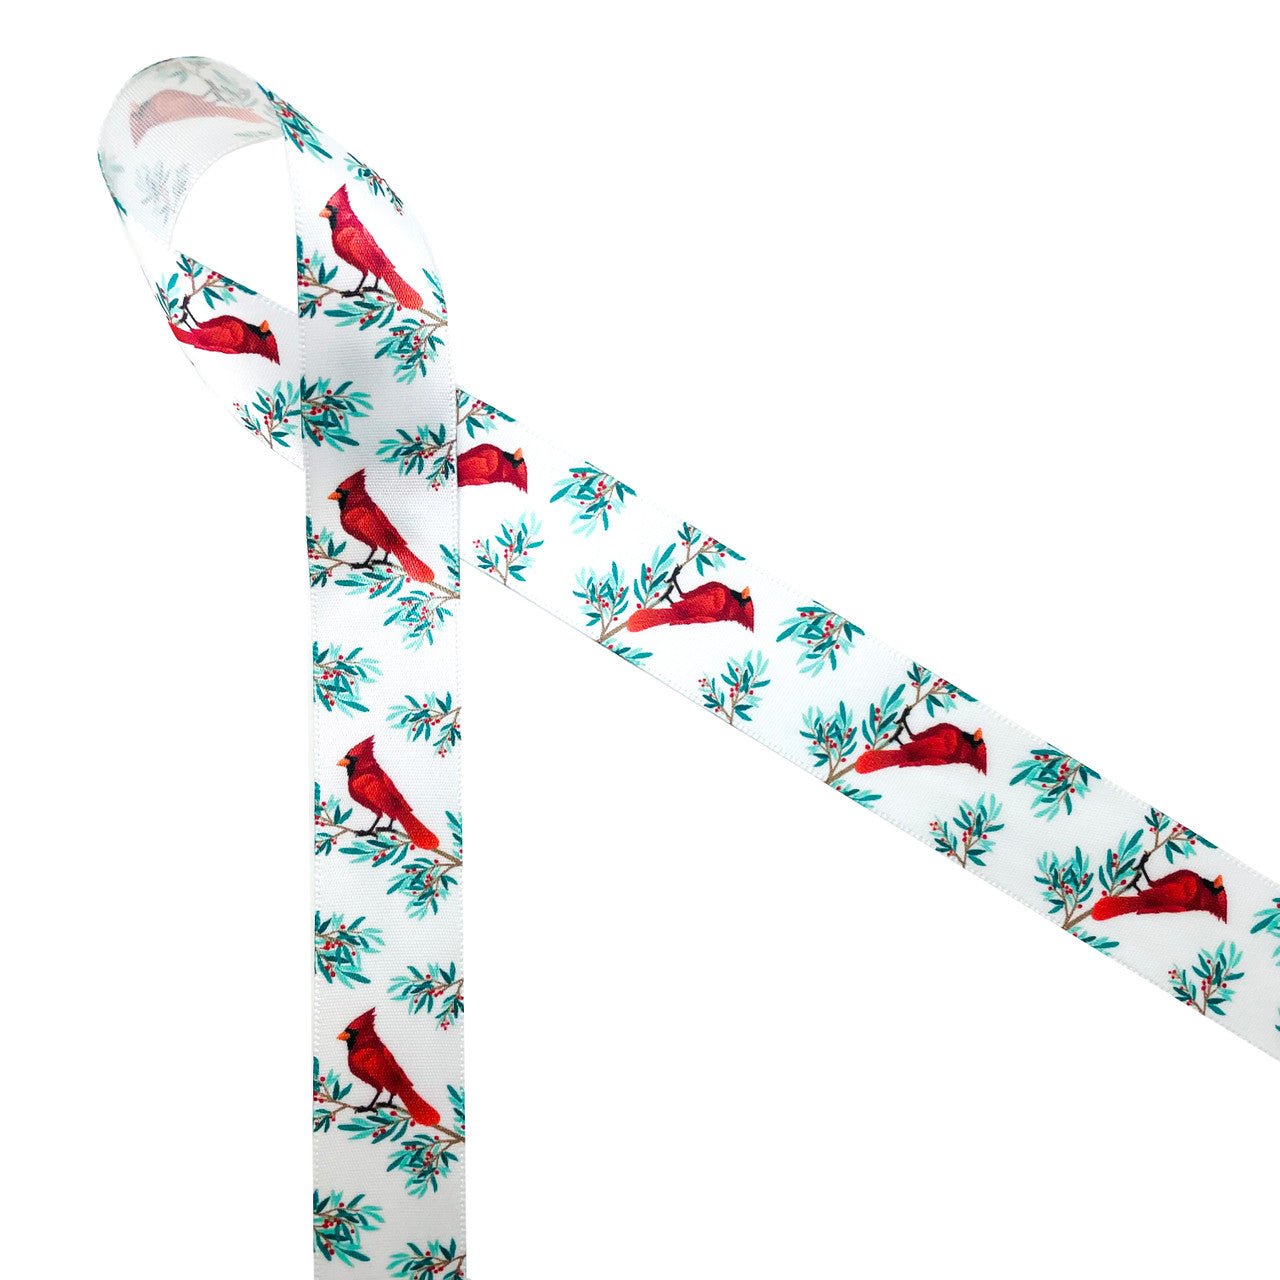 Red cardinals on a winter berry branch of red and green printed on 7/8" white single face satin ribbon is an ideal ribbon for Winter and Holiday gift wrap. This beautiful ribbon reflects the nature of Winter and is perfect for gift baskets, party decor, party favors and Holiday crafting. All our ribbon is designed and printed in the USA